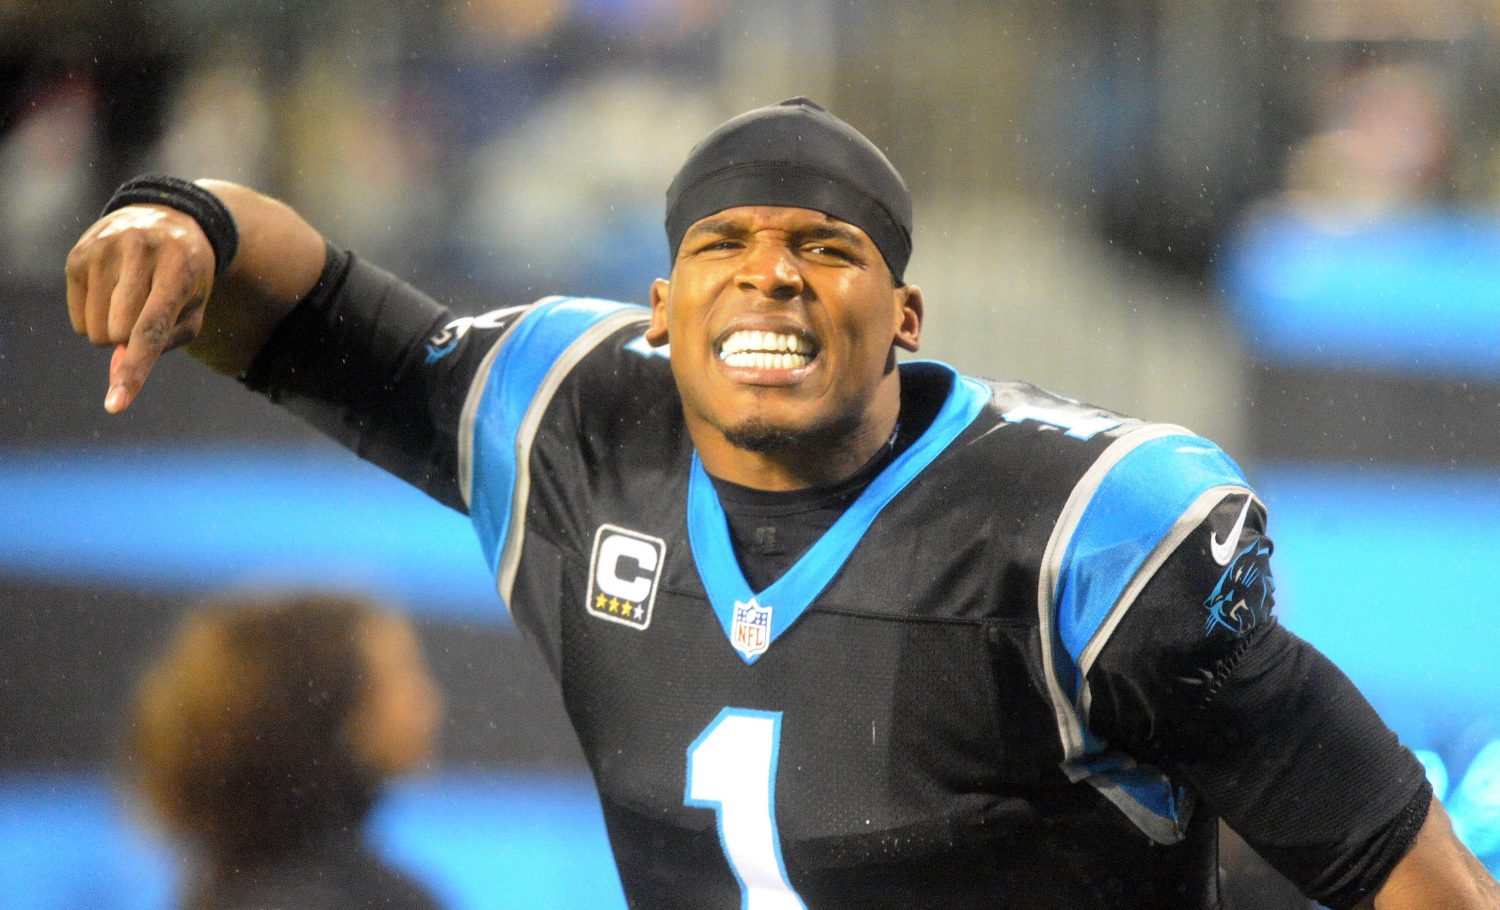 Carolina Panthers Cam Newton (1) yells toward the crowd as he celebrates a touchdown against the Indianapolis Colts during the fourth quarter on Monday, Nov. 2, 2015, at Bank of America Stadium in Charlotte, N.C. (David T. Foster III/Charlotte Observer/TNS)